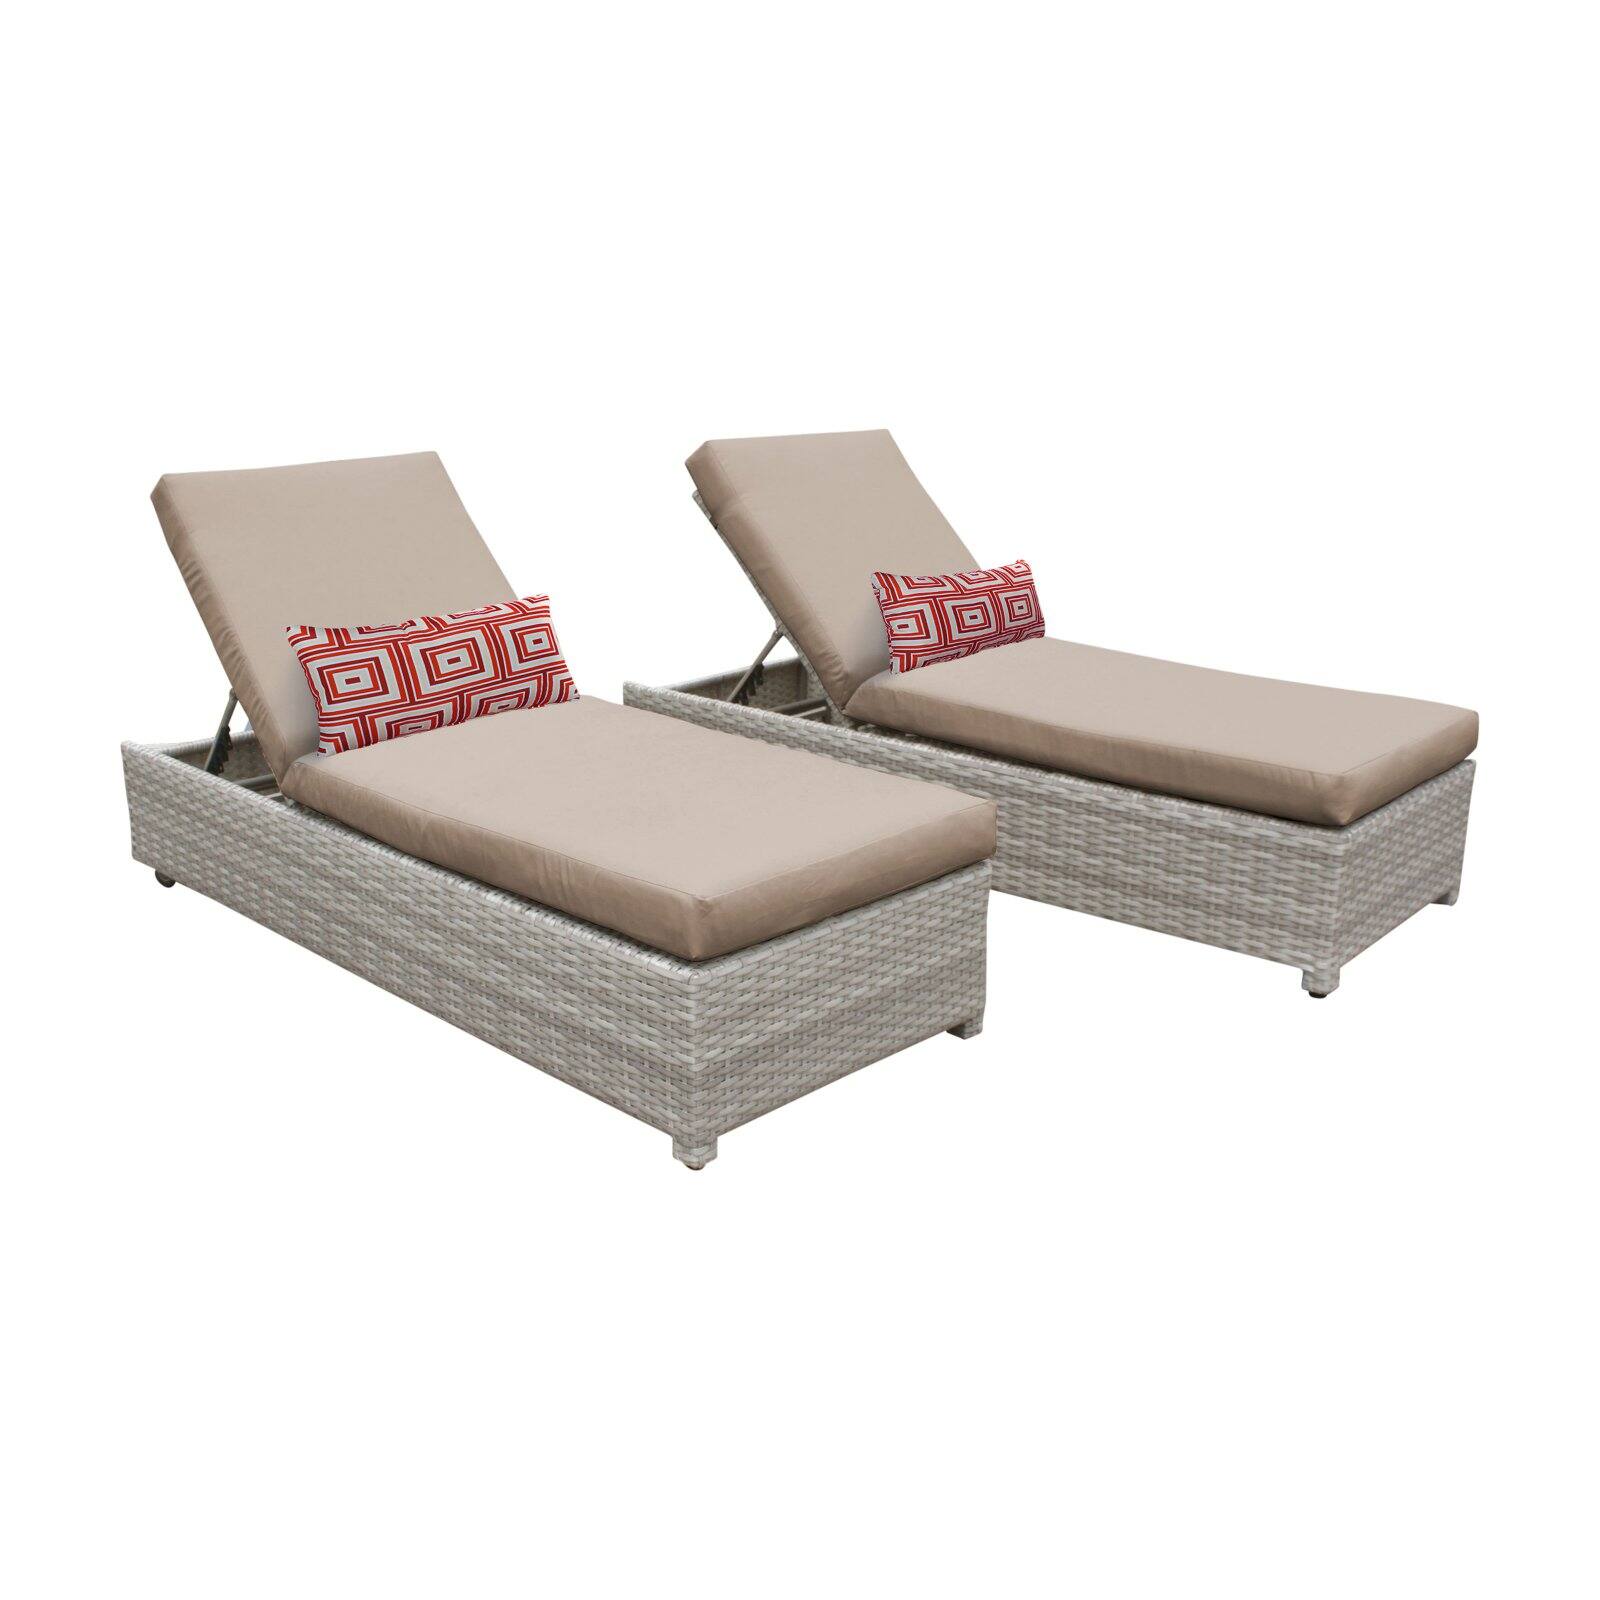 TK Classics Fairmont Wheeled Wicker Outdoor Chaise Lounge Chair - Set of 2 - image 1 of 11